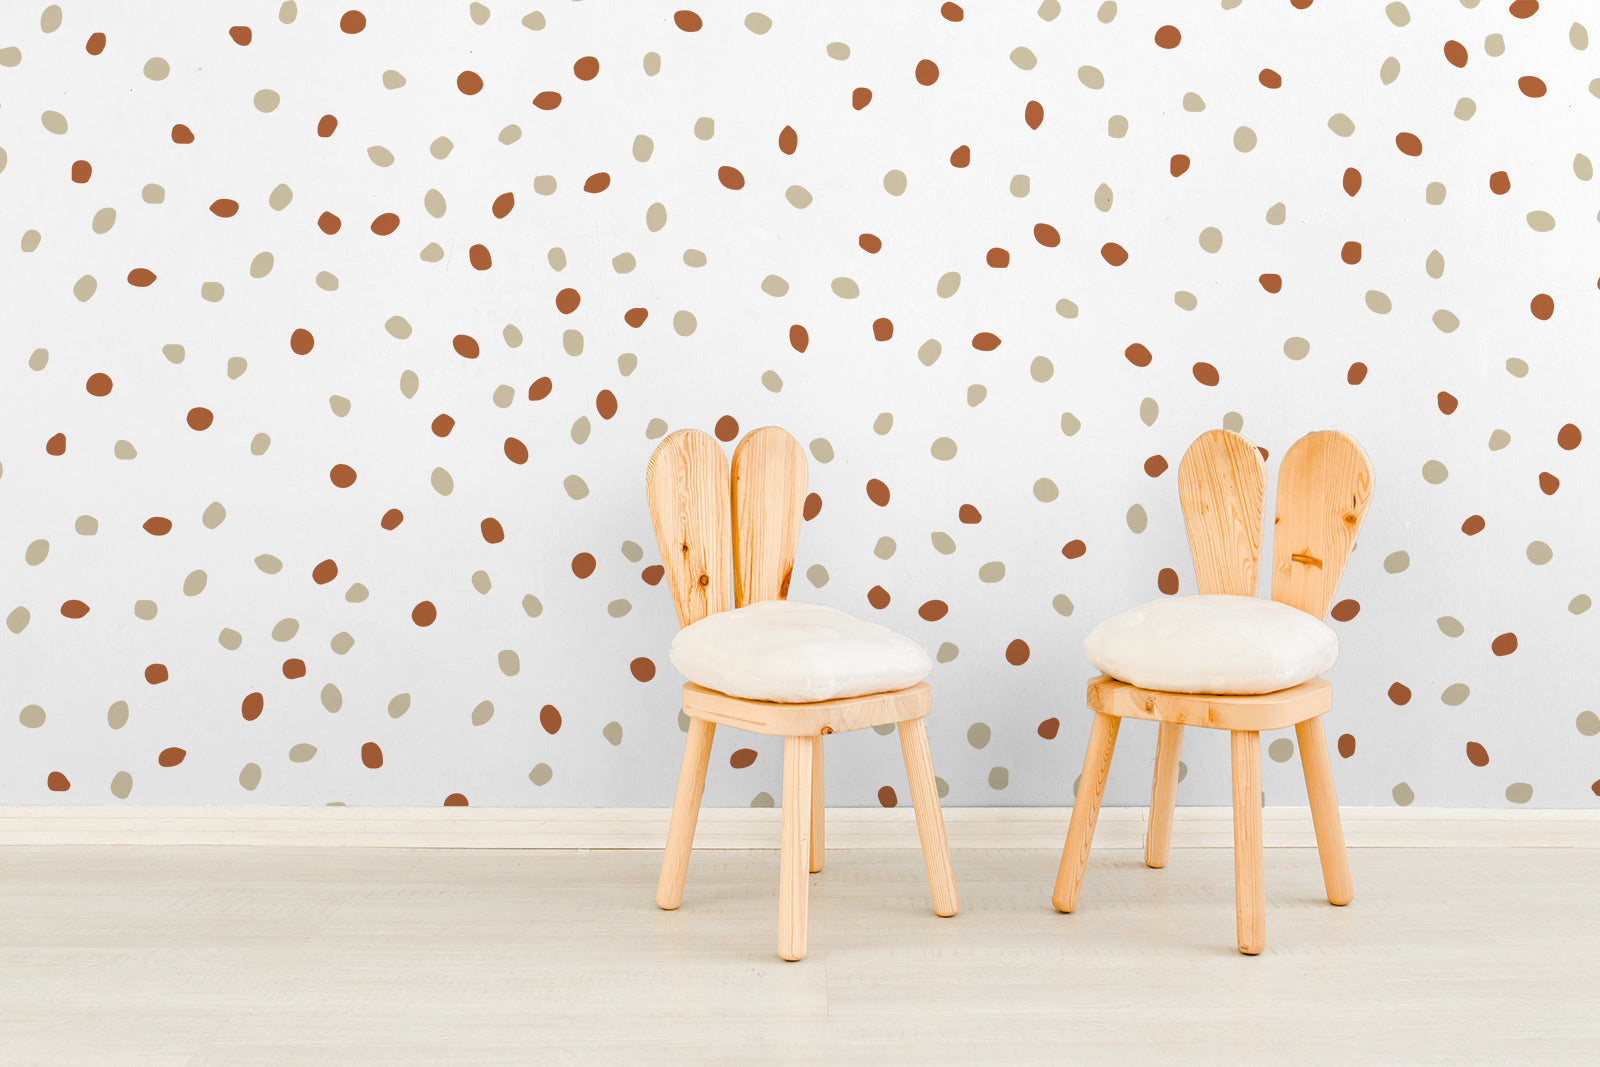 Polka dots peel and stick wall decals 